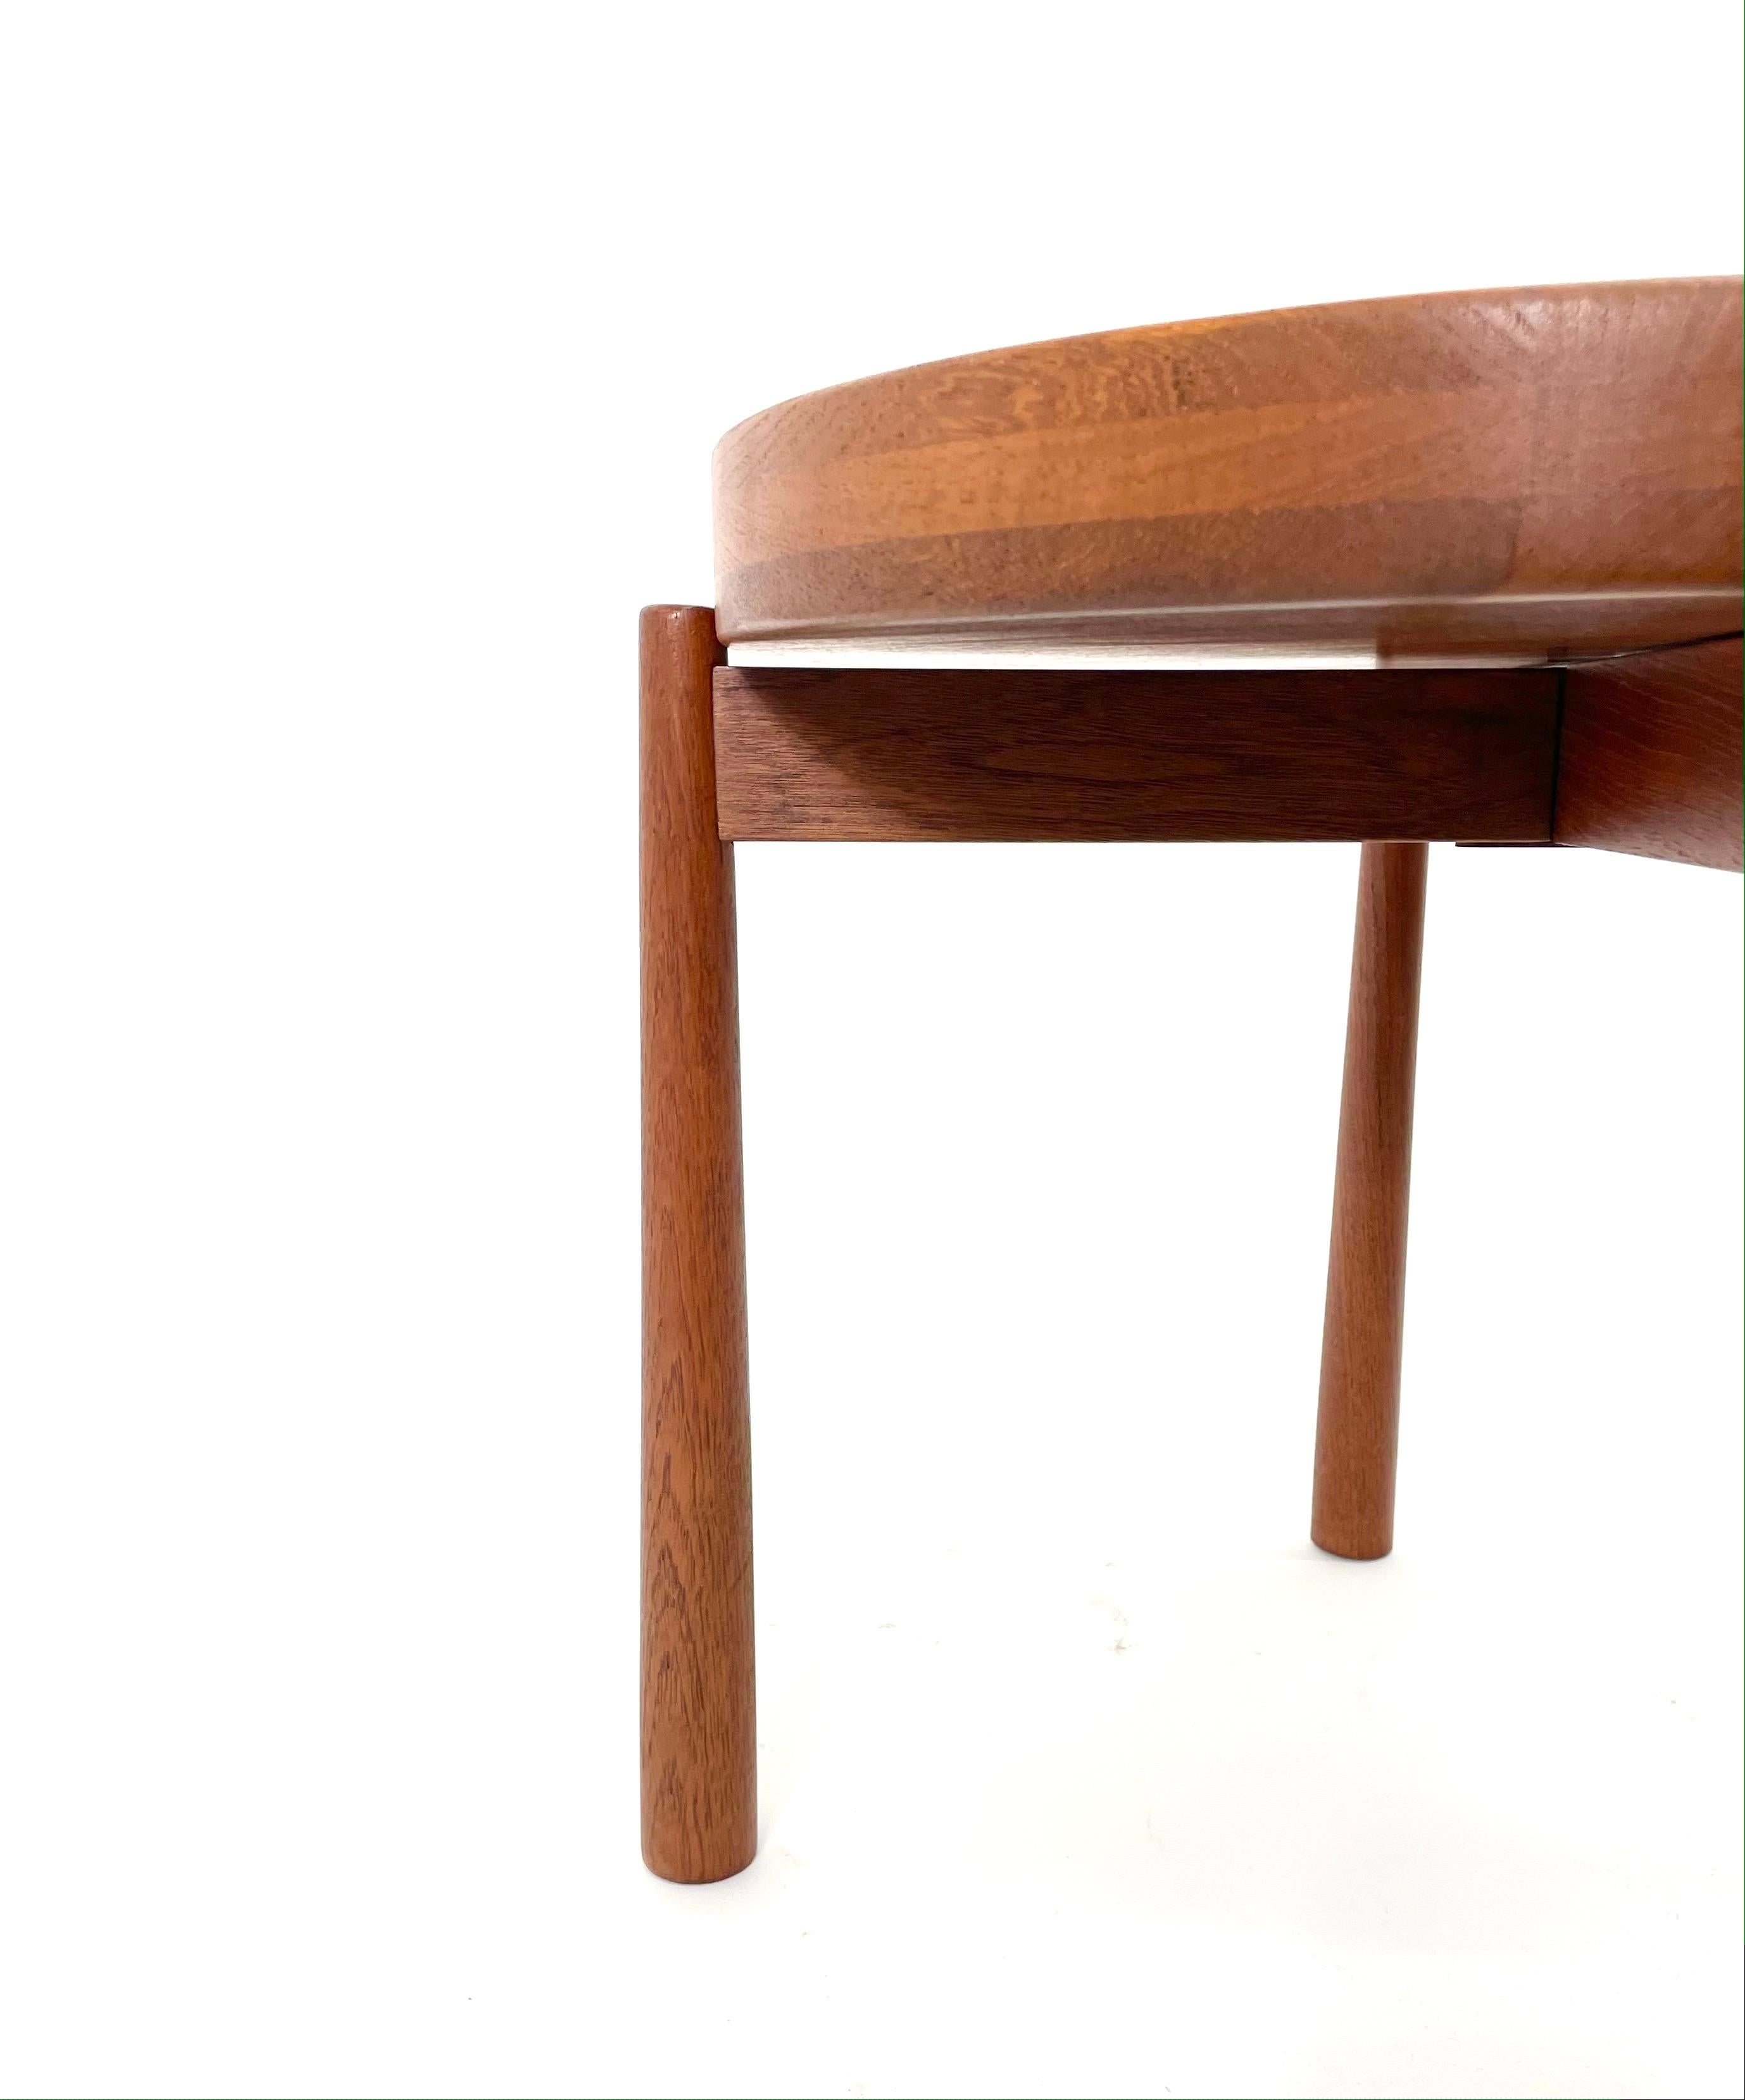 Beautiful side table designed by Jens Harald Quistgaard for DUX, 1950s, in teak. 
We have two available. Price is per table.

The exquisitely shaped wood top can be removed and used a tray or function as a decorative bowl, with one side being flat